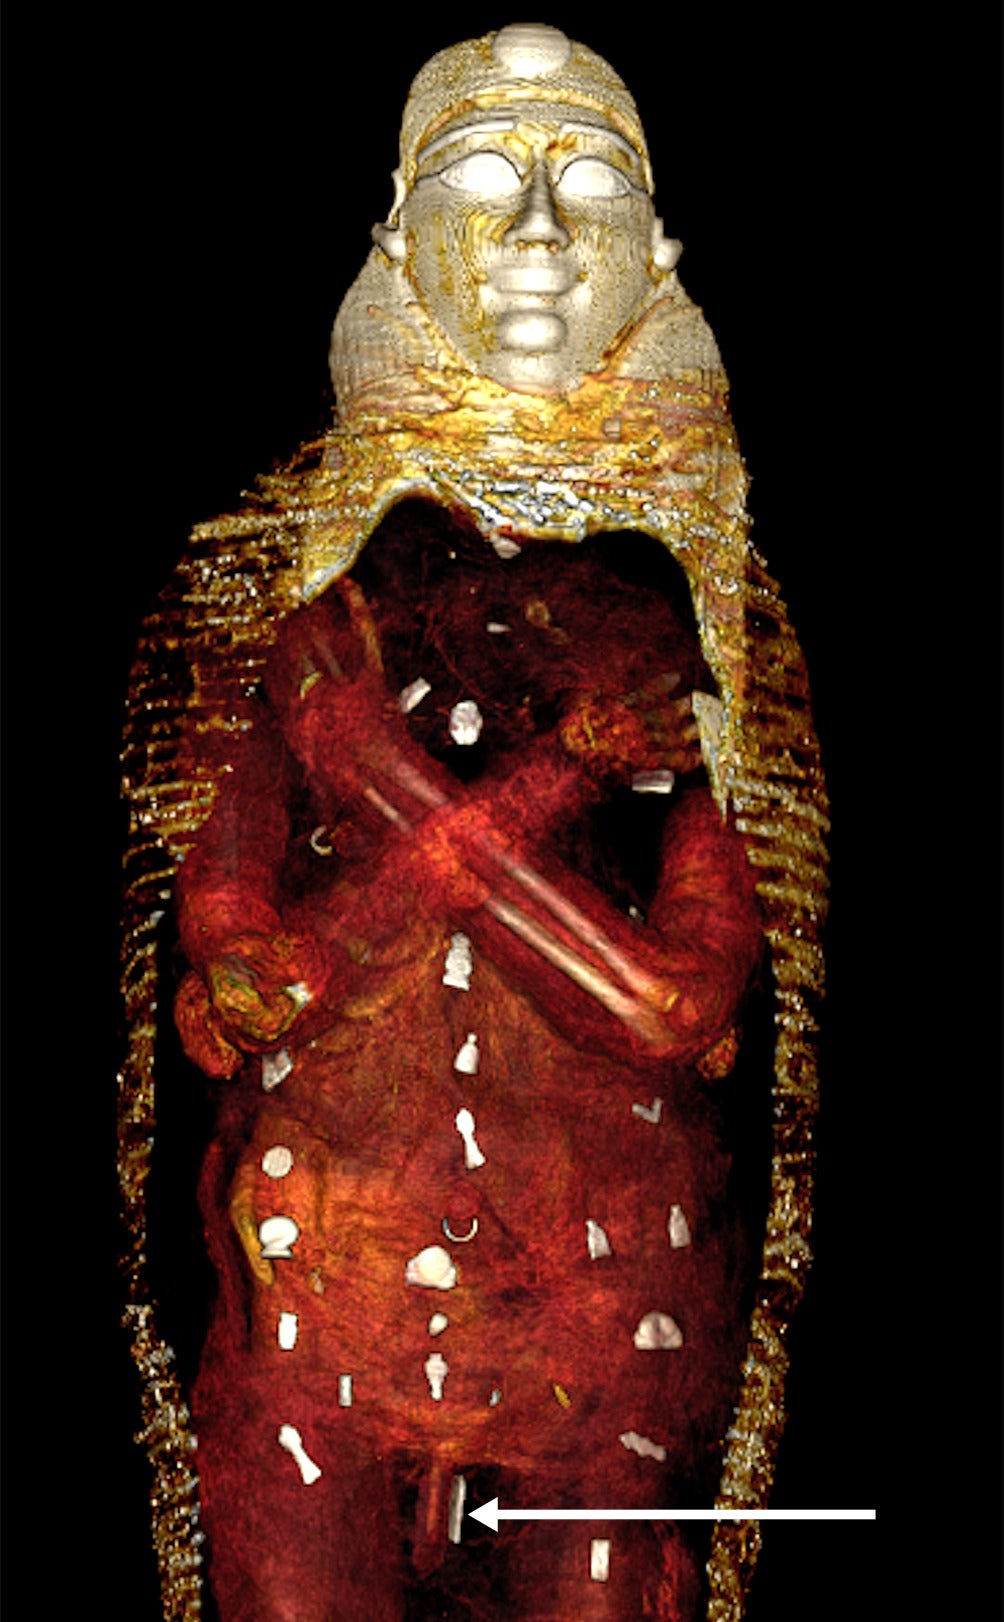 This teen mummy was buried with dozens of gold amulets